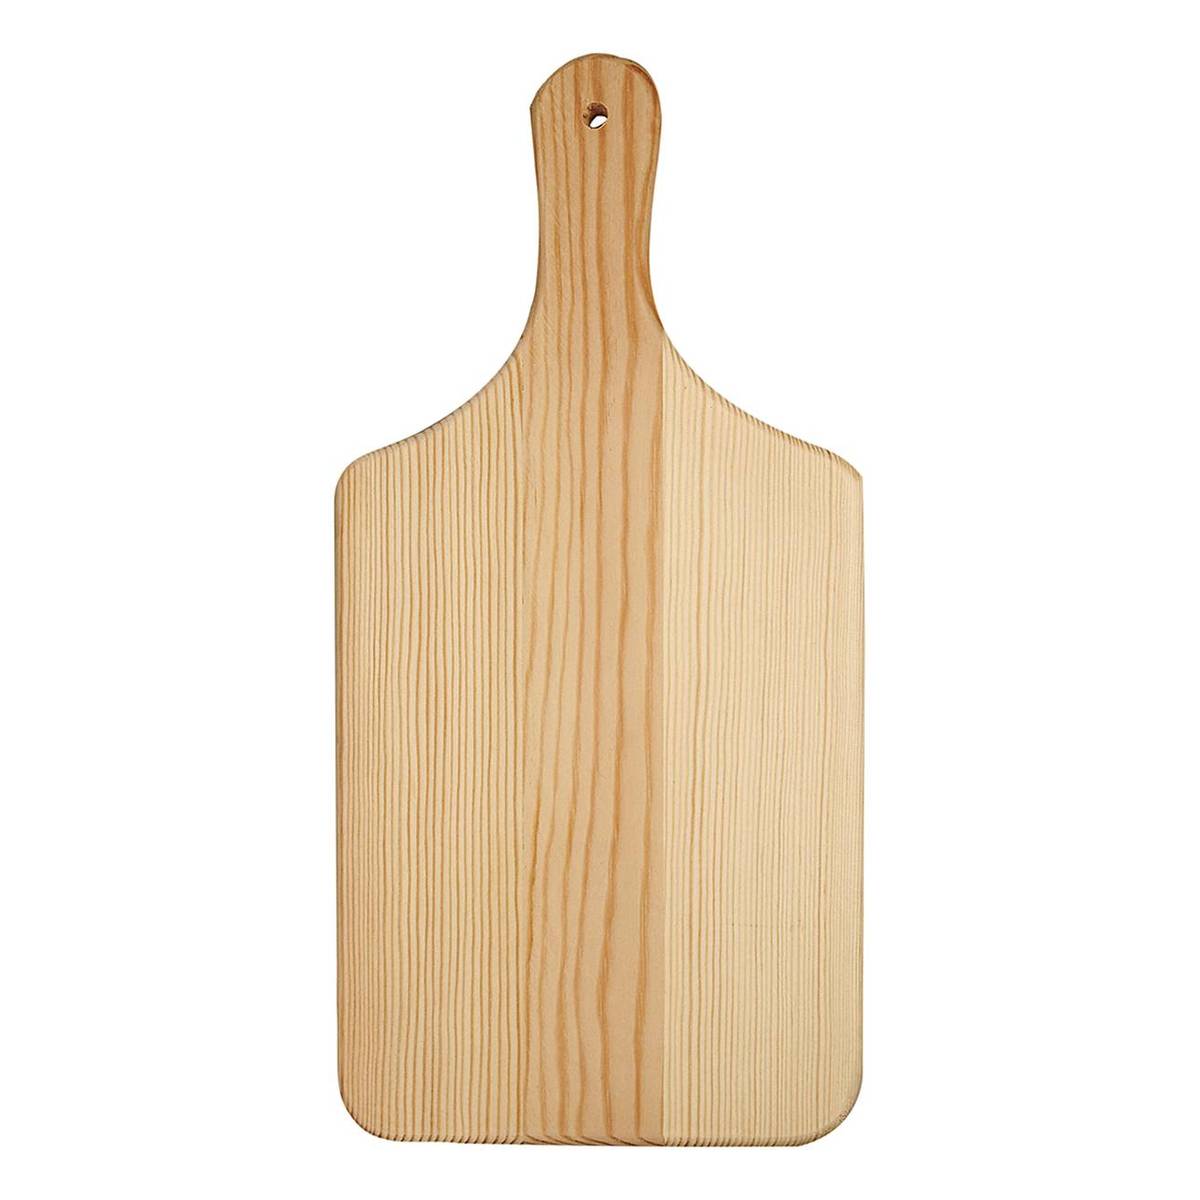 Creative Hobbies Small Unfinished Wooden Cutting Boards - Mini